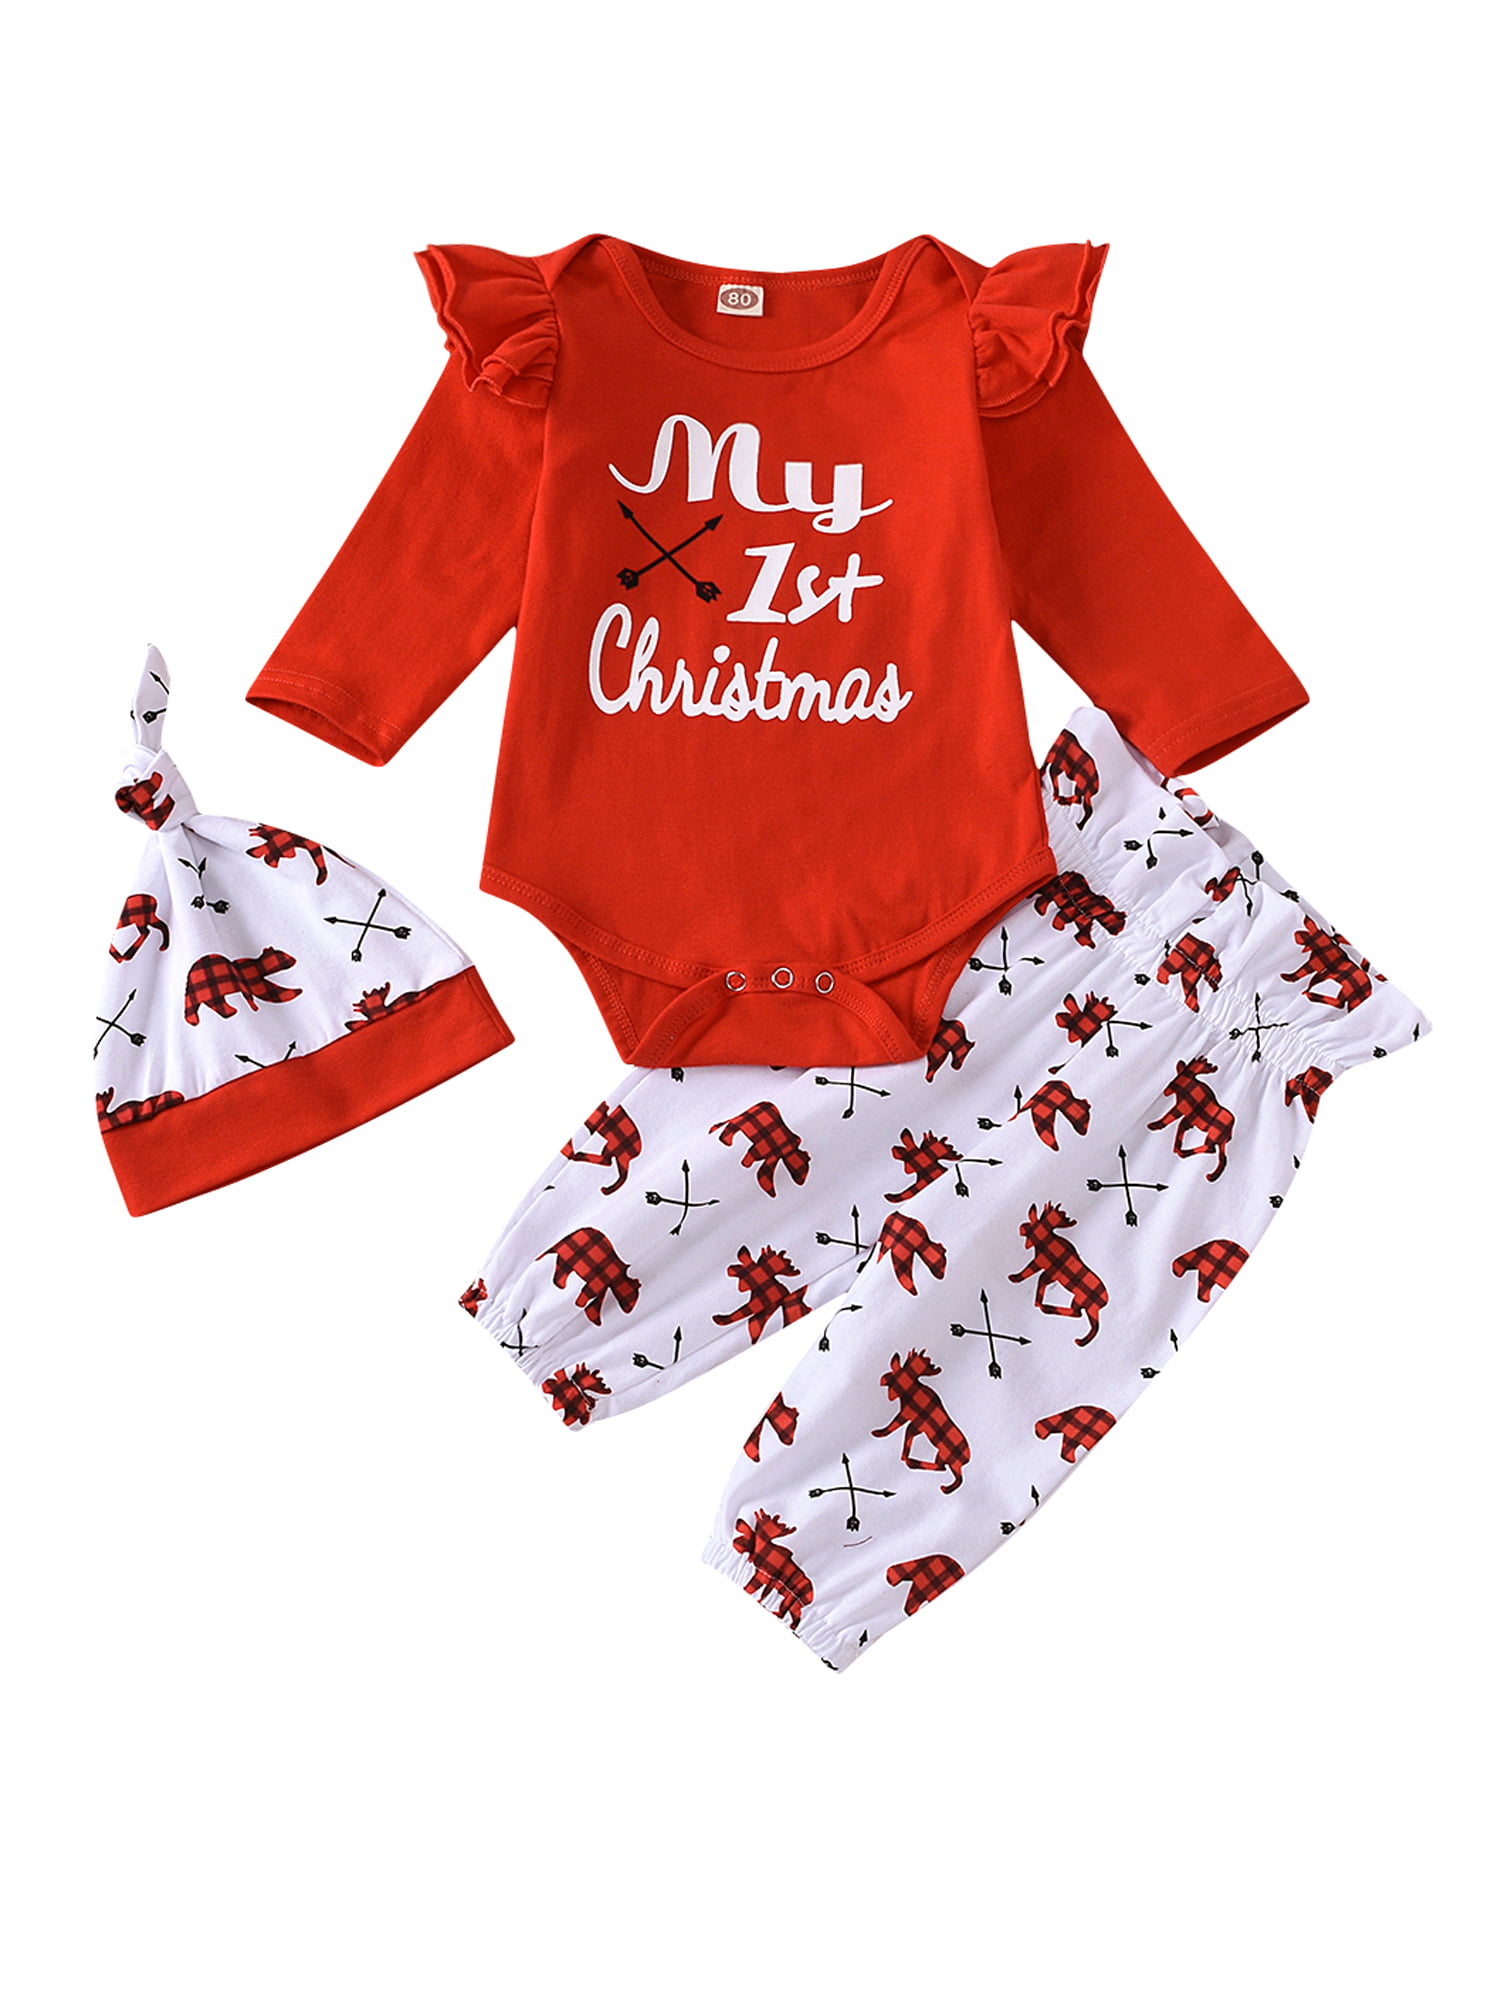 Newborn Baby Girl My First Christmas Tops Romper+Tulle Pants Outfits Set Clothes 